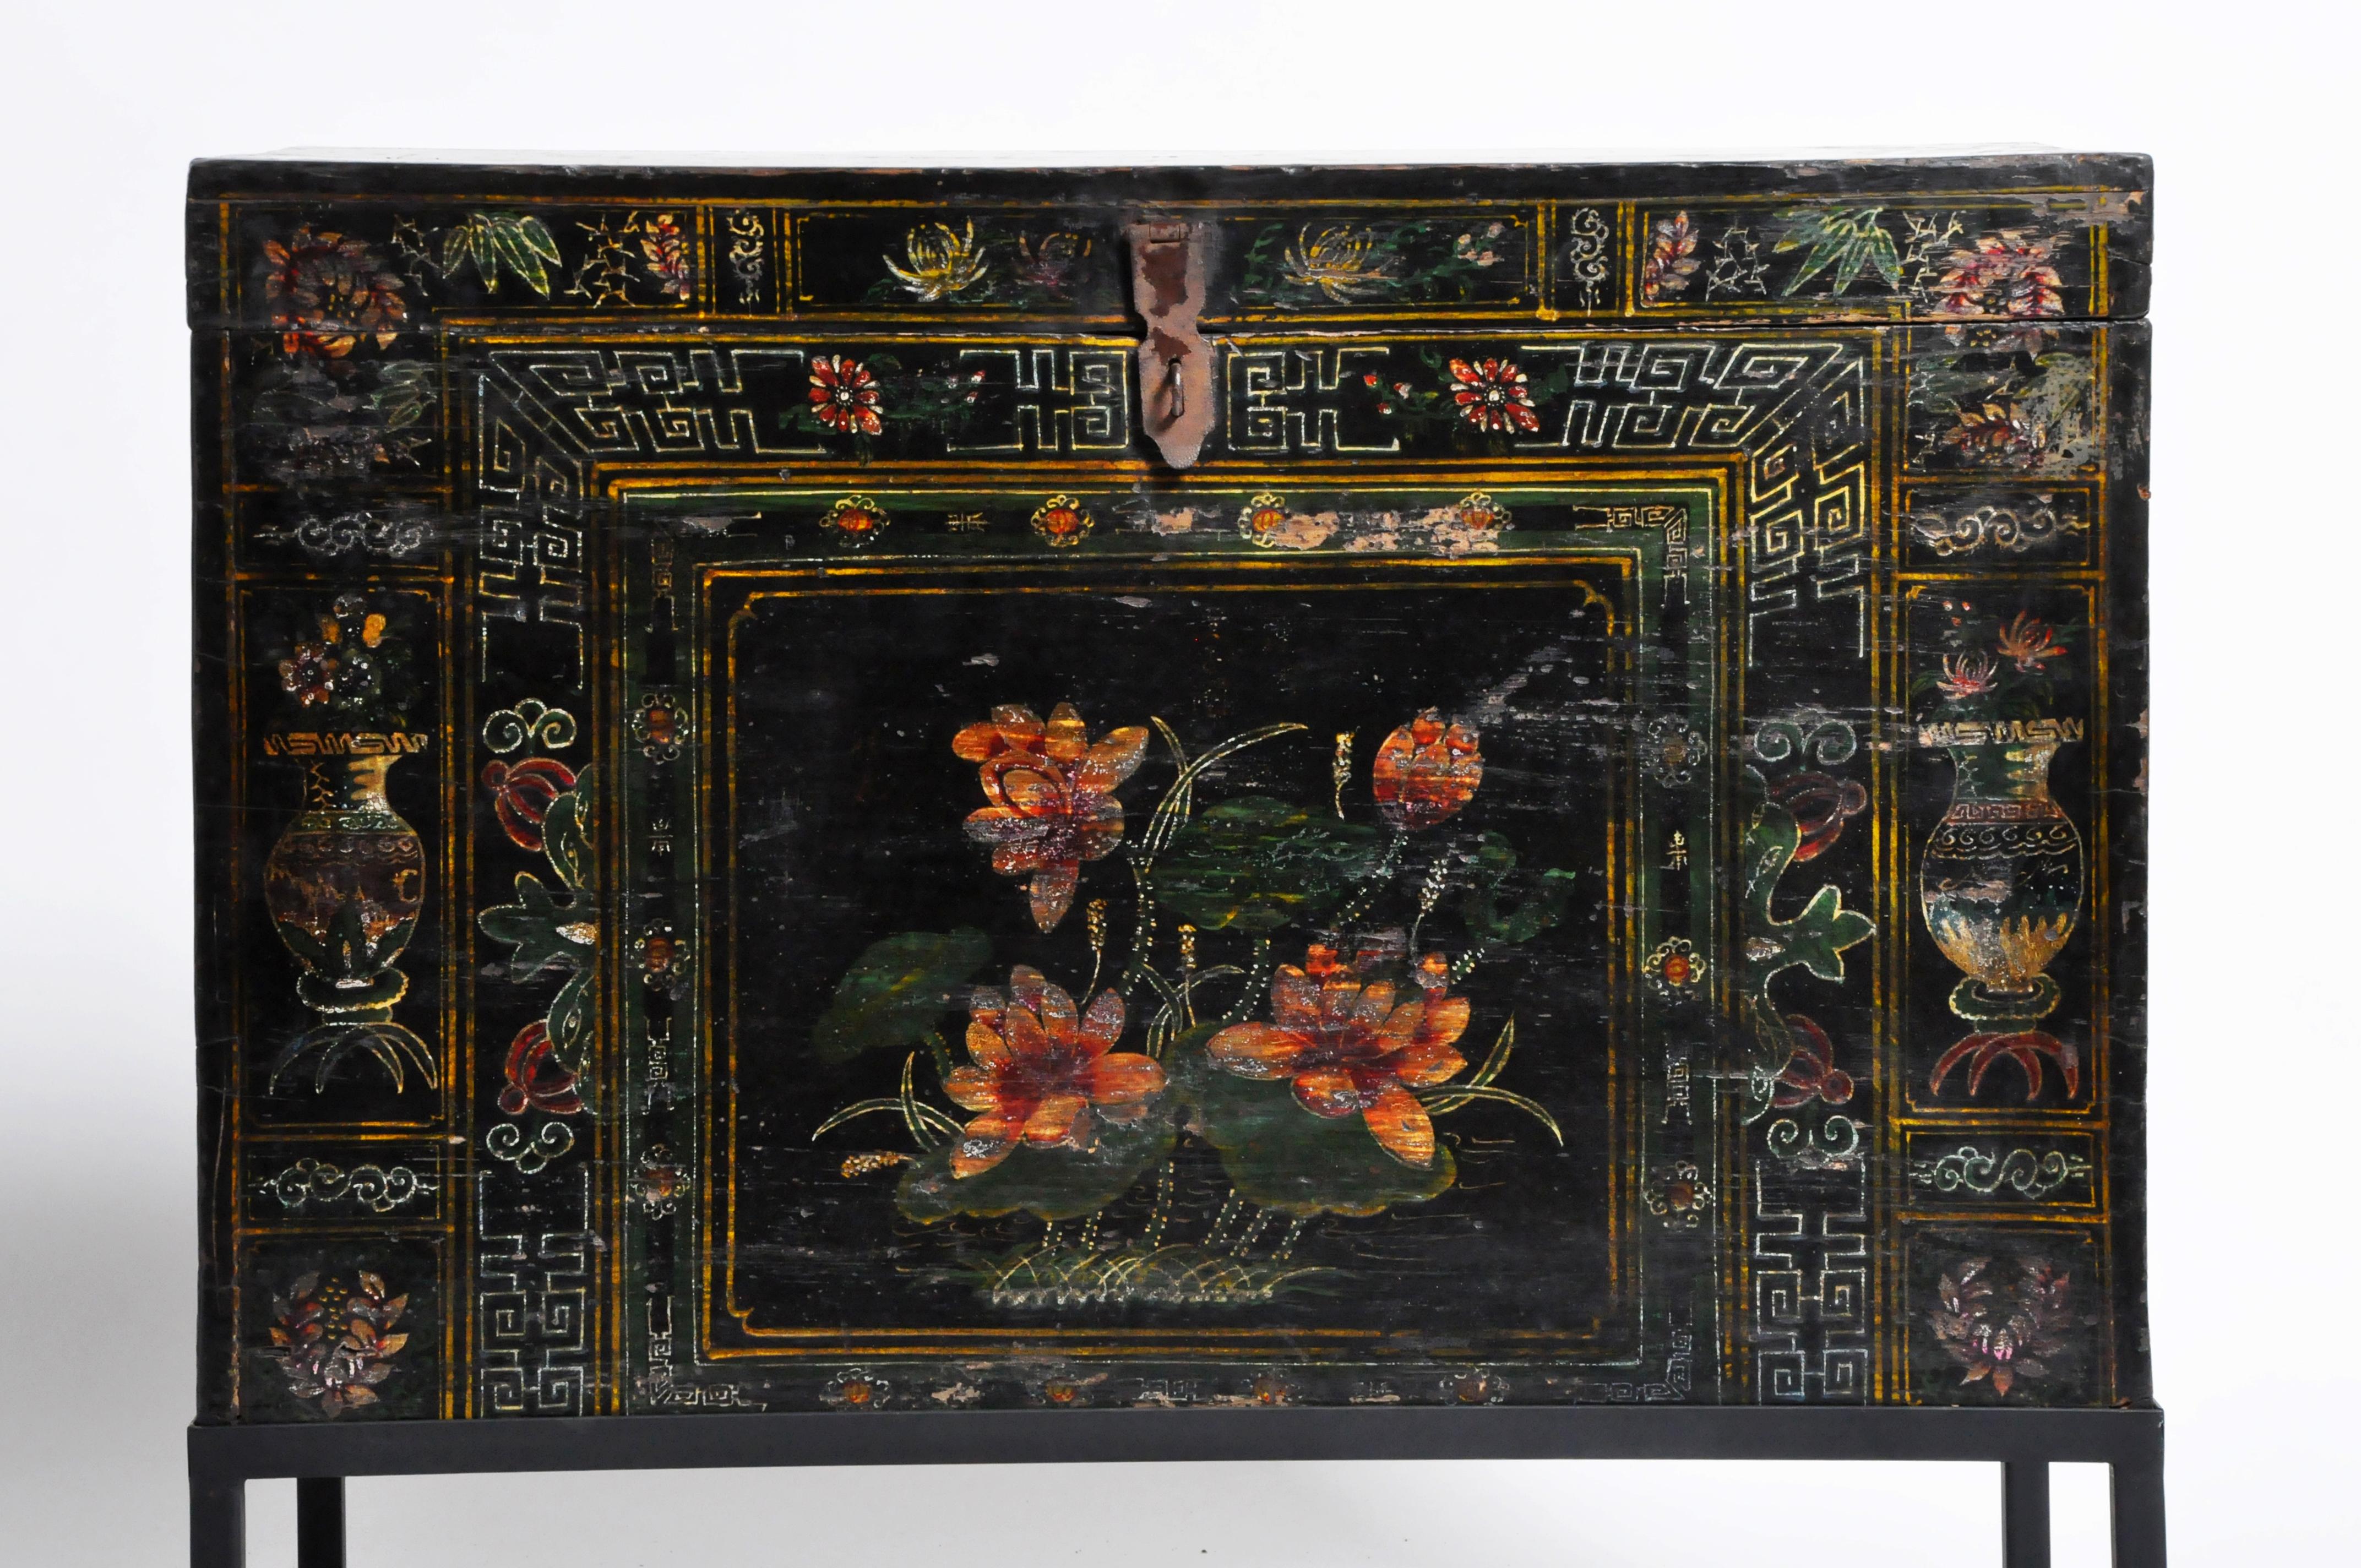 This gorgeous late Qing dynasty storage chest is from China and was made from elmwood and paint. The chest has been raised on a metal base and features beautifully painted artwork. Wear consistent with age and use. The base is newly made. 

The